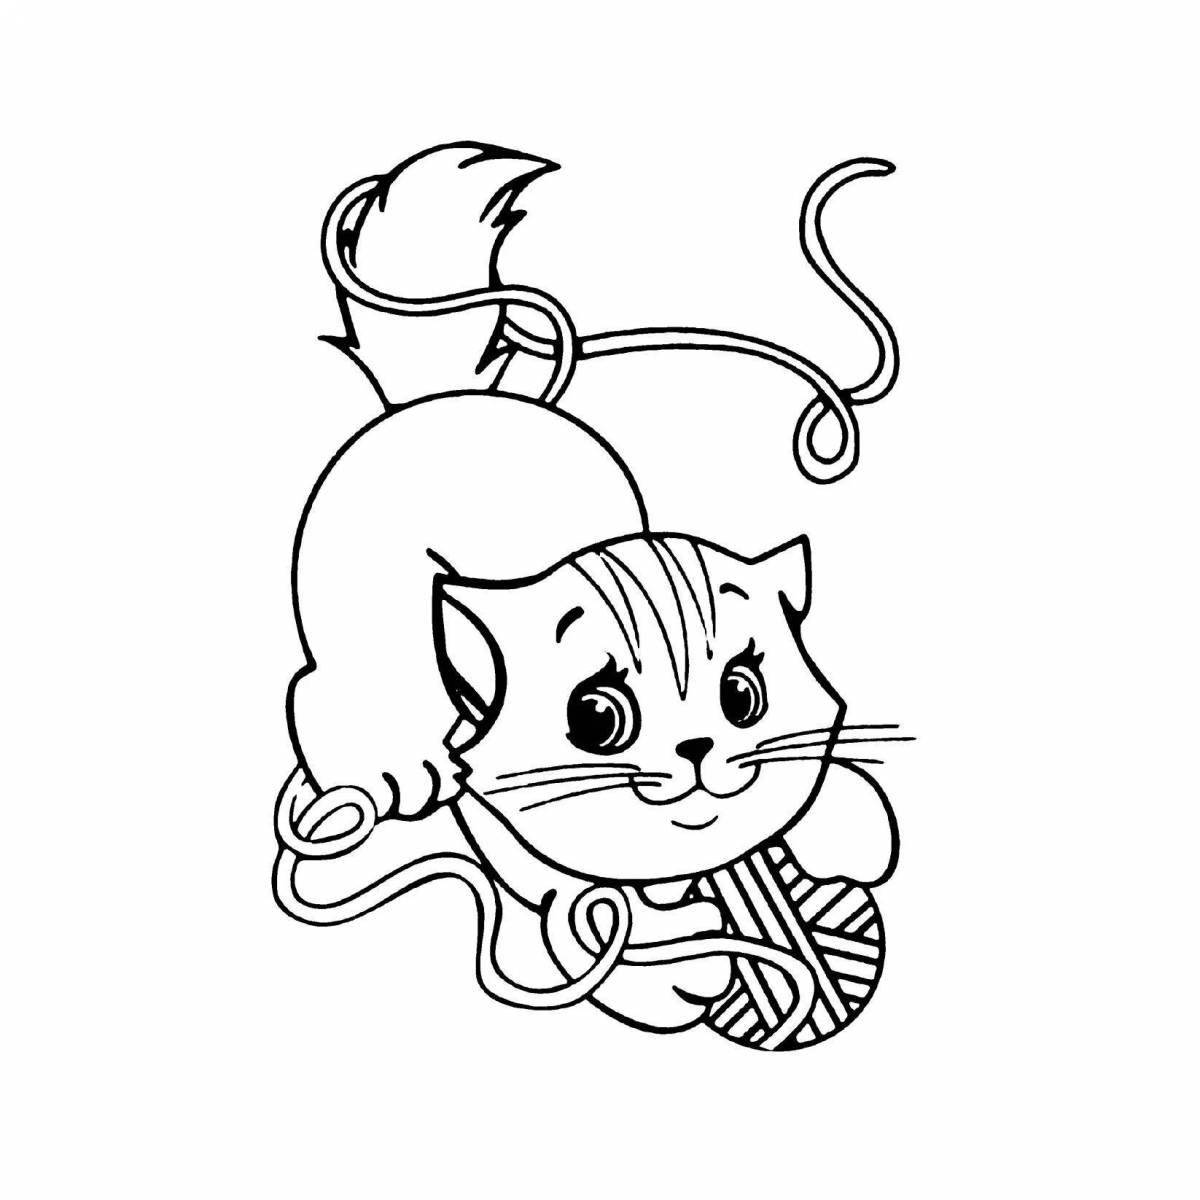 Coloring book frolicking kitten with a ball